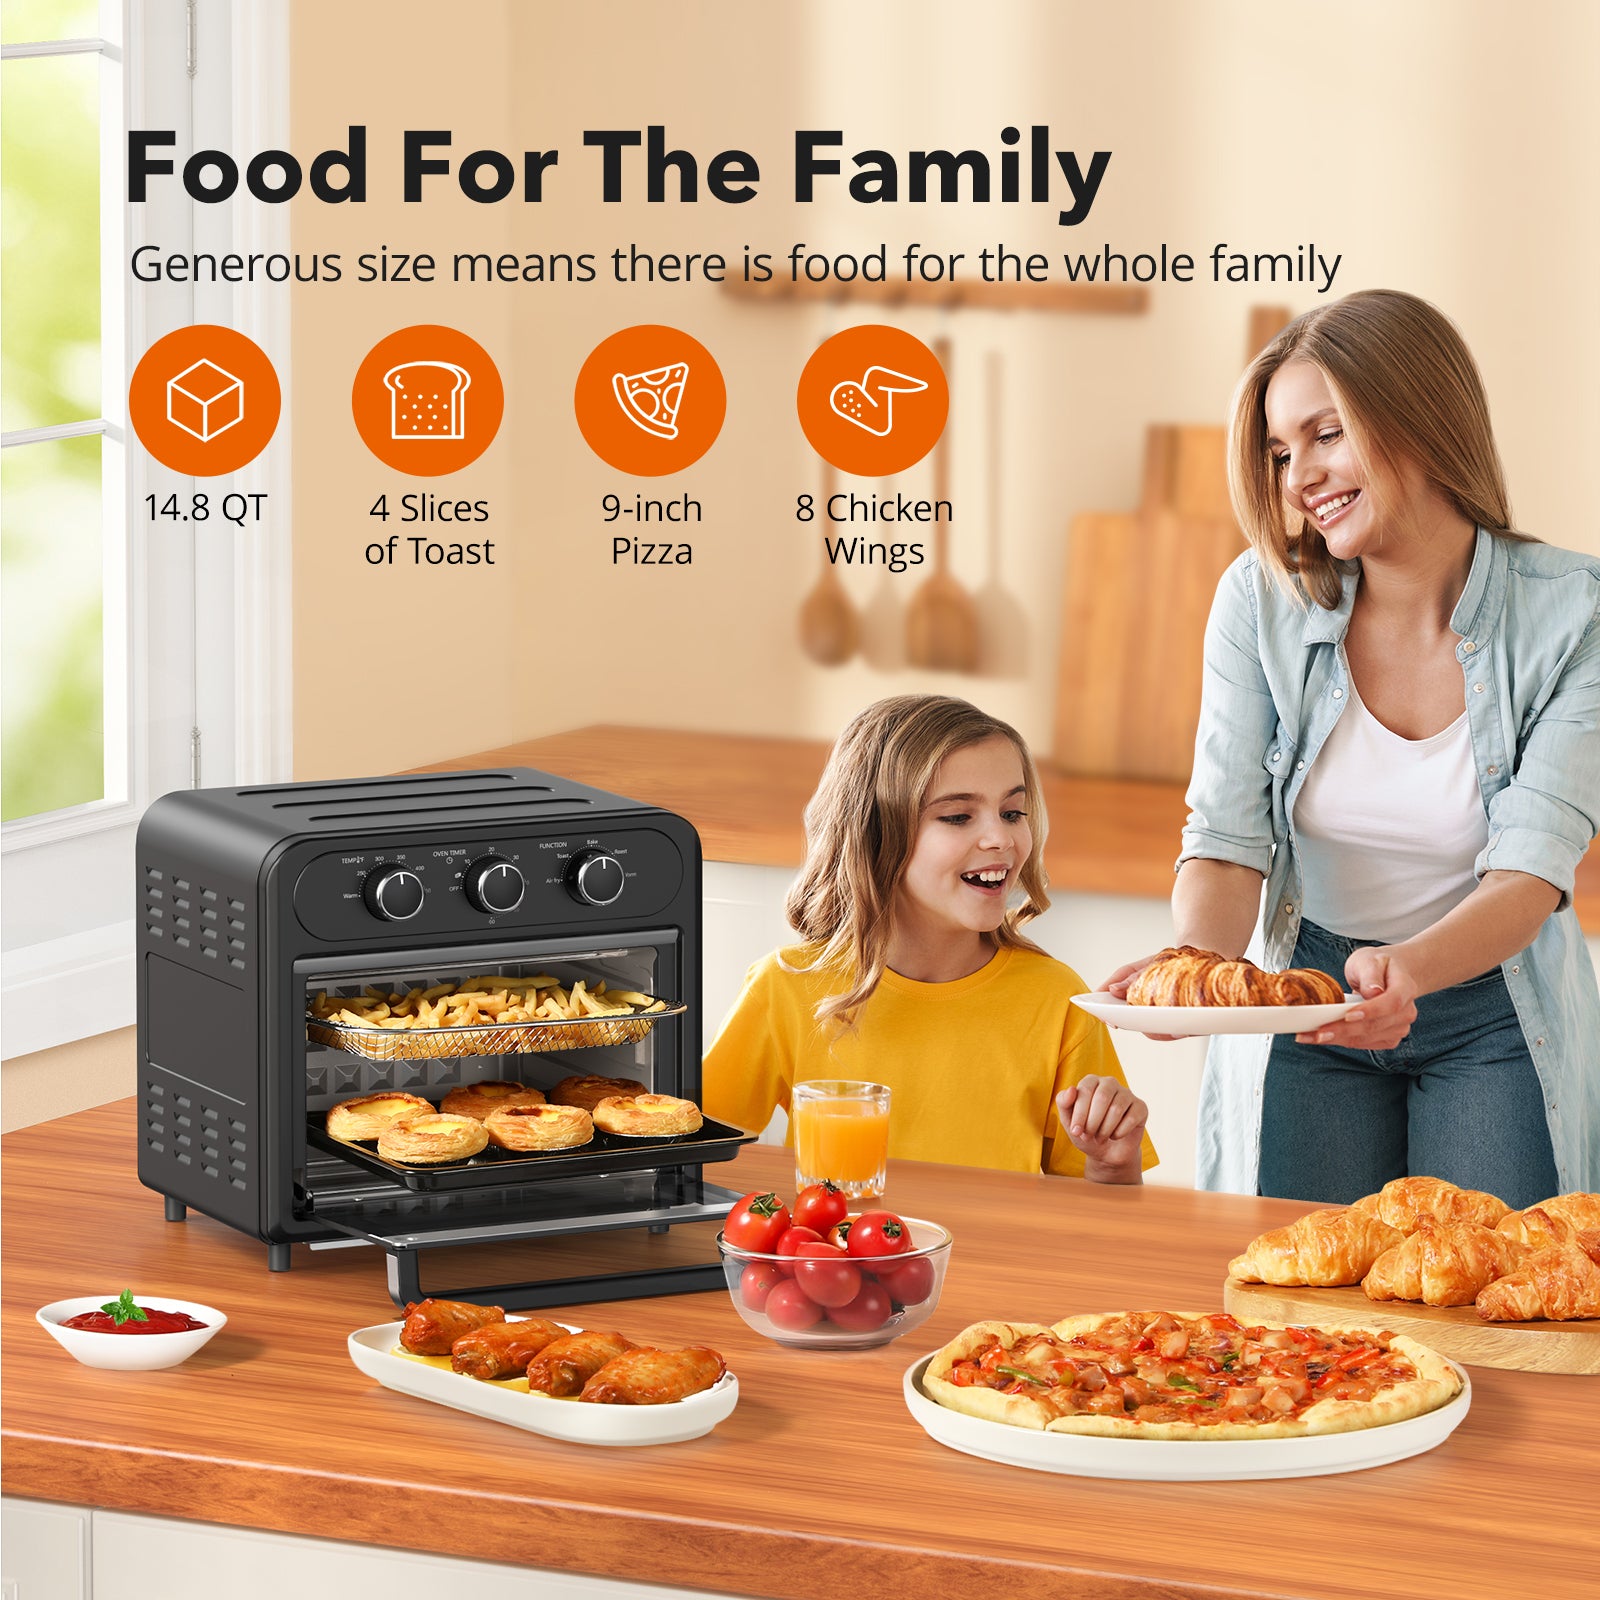 TaoTronics Air Fryer, 8-in-1 Airfryer Oven with Viewing Window